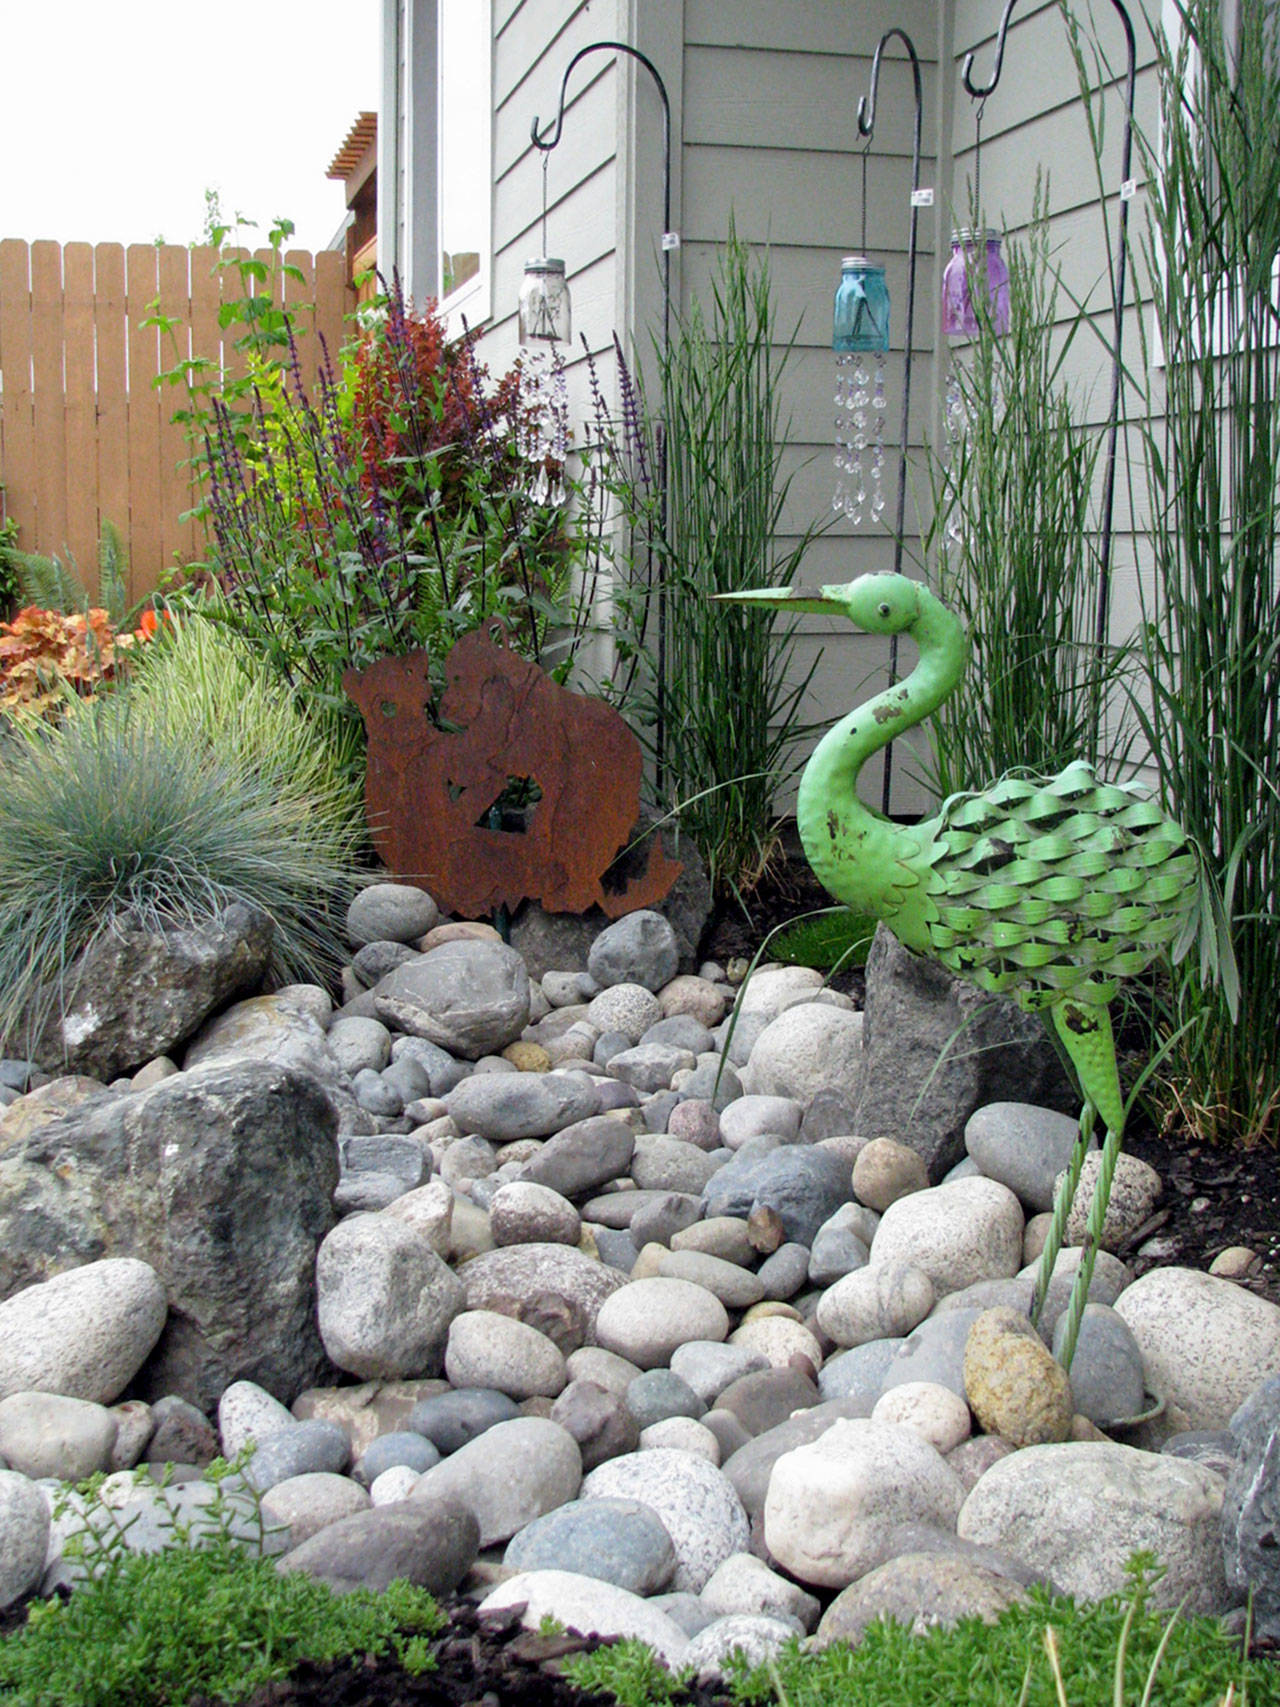 Dry streambeds, small ponds and other water features along with cistern and drip irrigation systems will be exhibited on the Petals & Pathways Home Garden Tour sponsored by the Master Gardener Foundation of Clallam County on Saturday in Sequim.